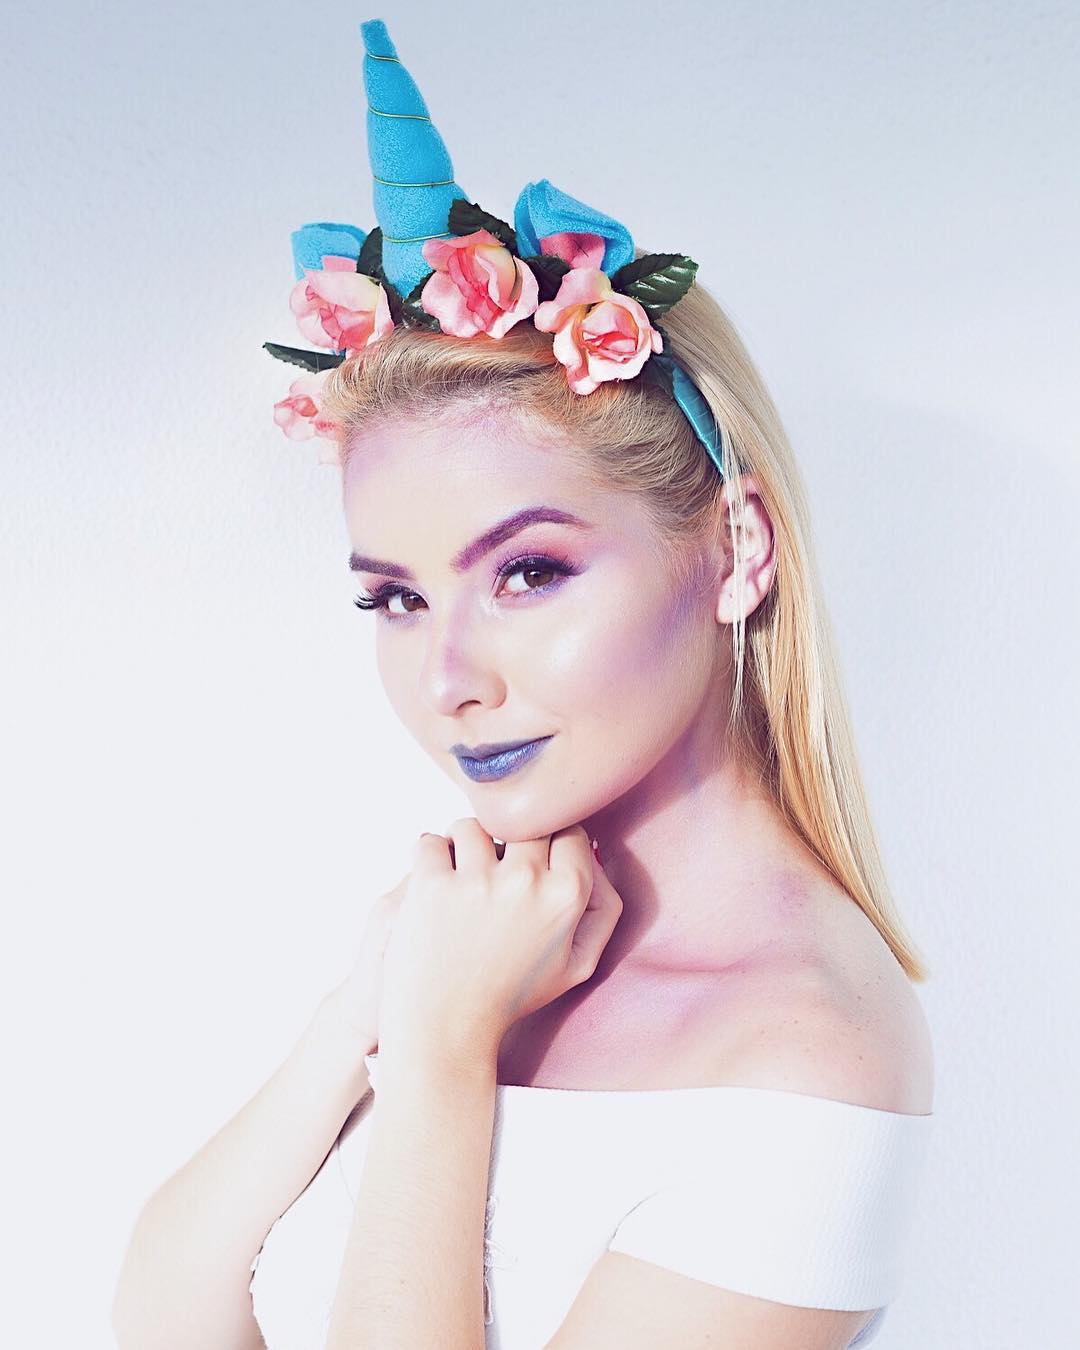 Unicorn Makeup From Conscious Companies That’s A Daydream Come True